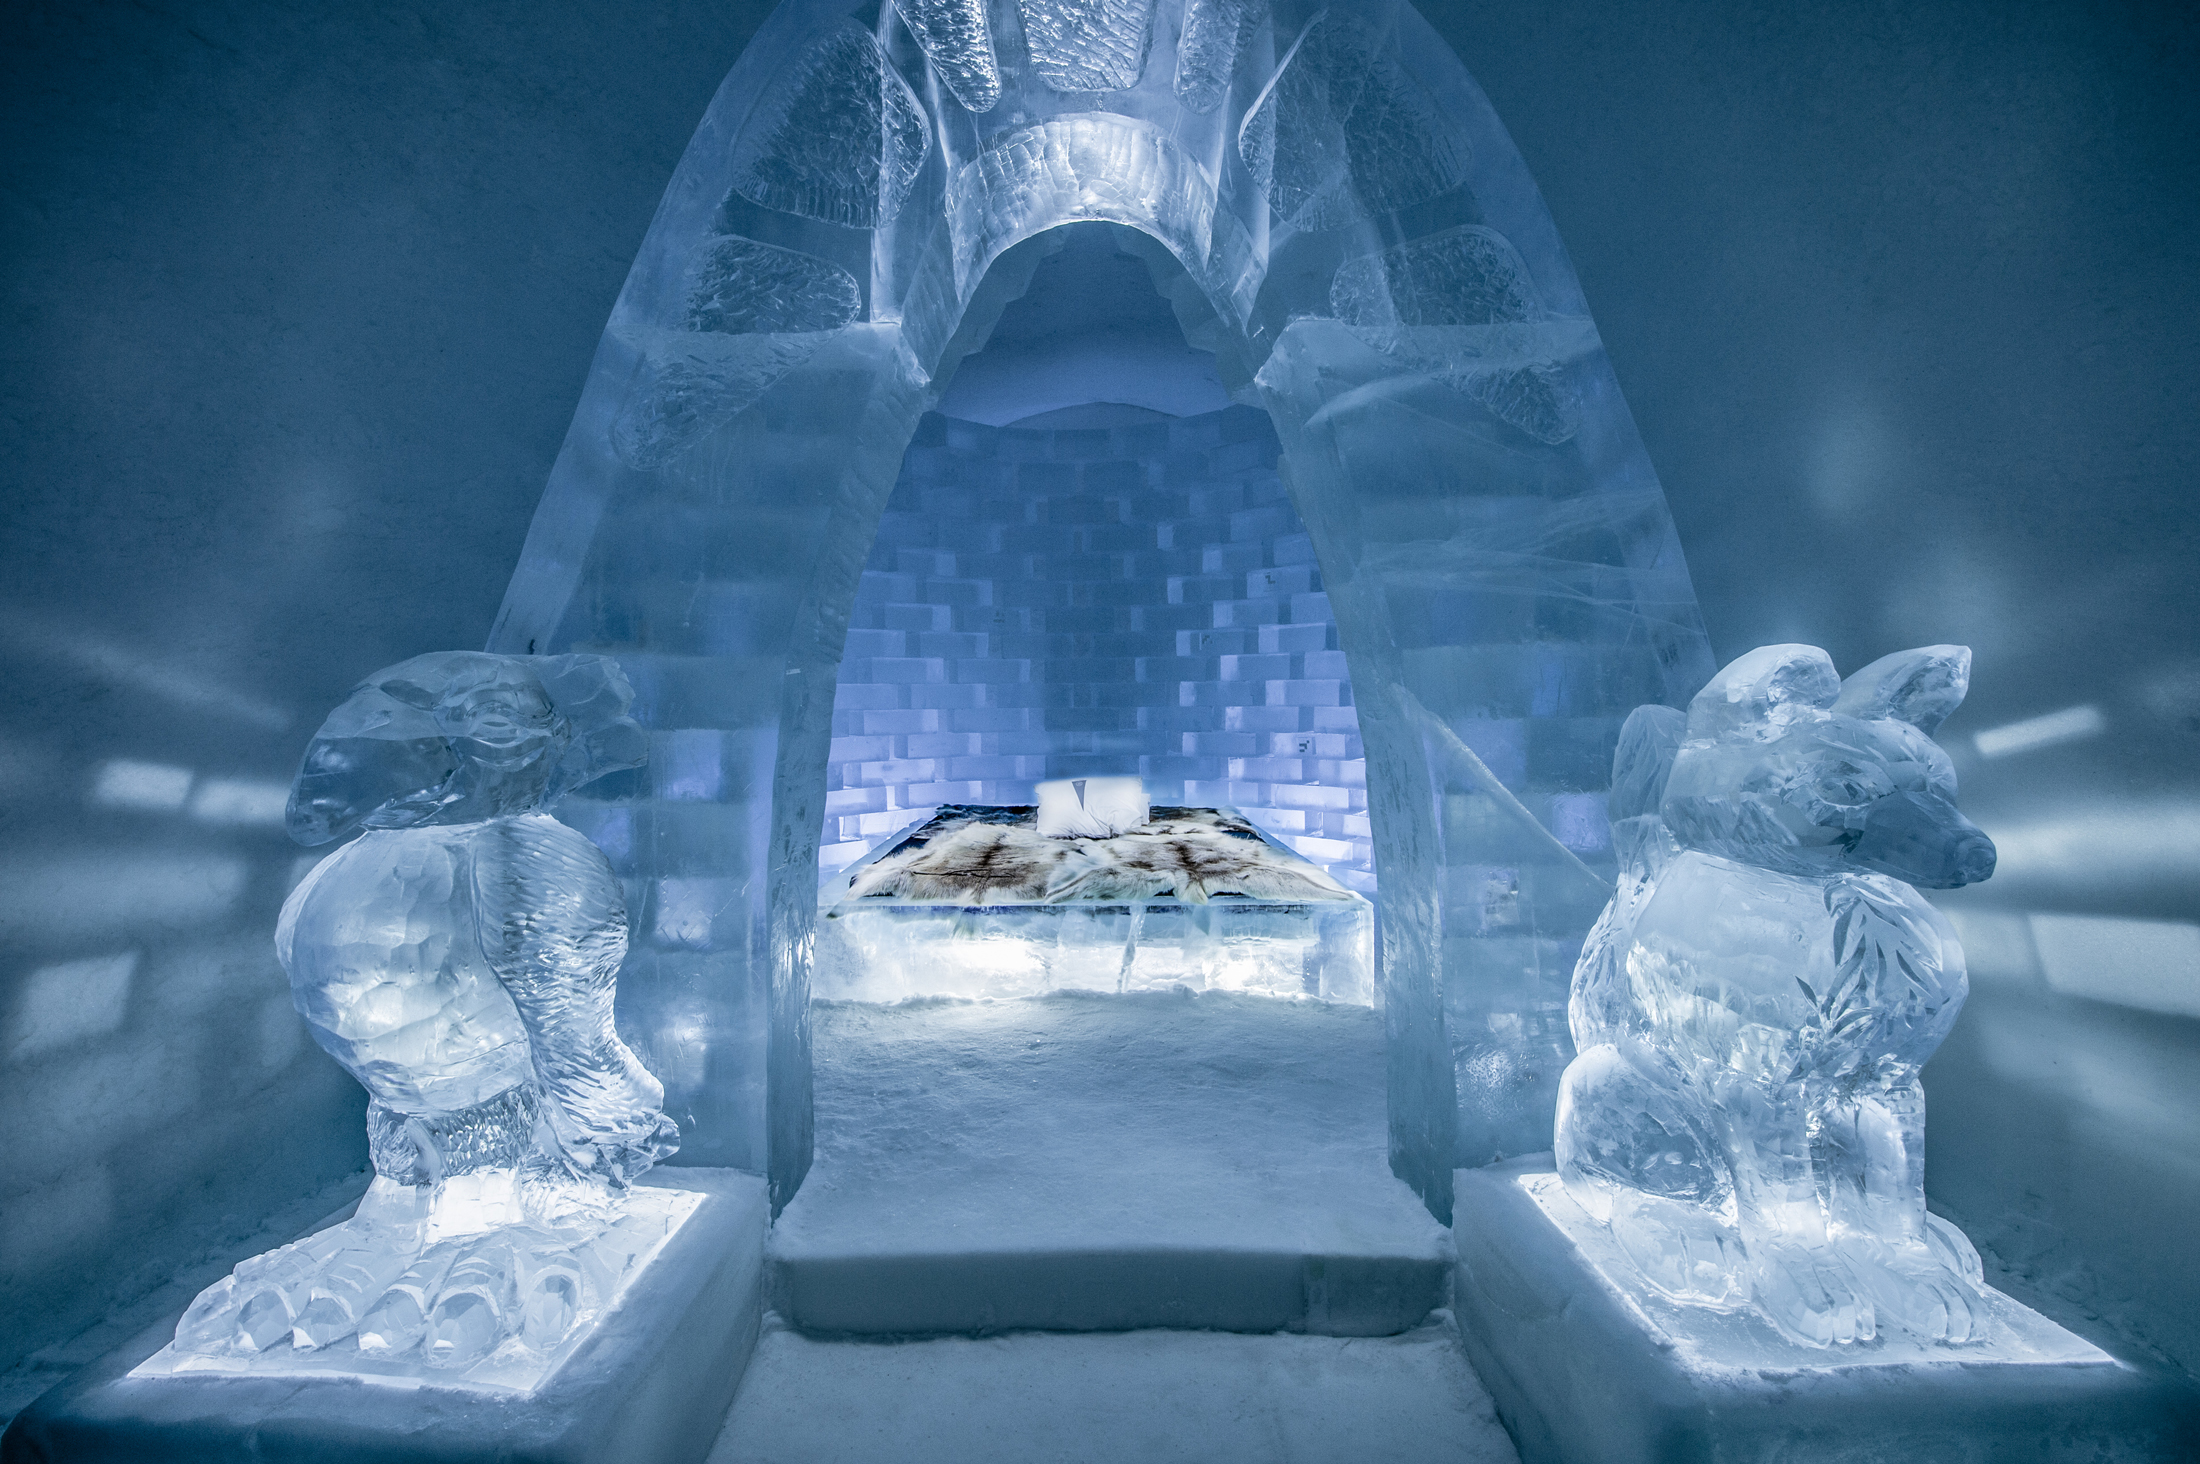 Two new art suites of ice and snow in the yearround open Icehotel